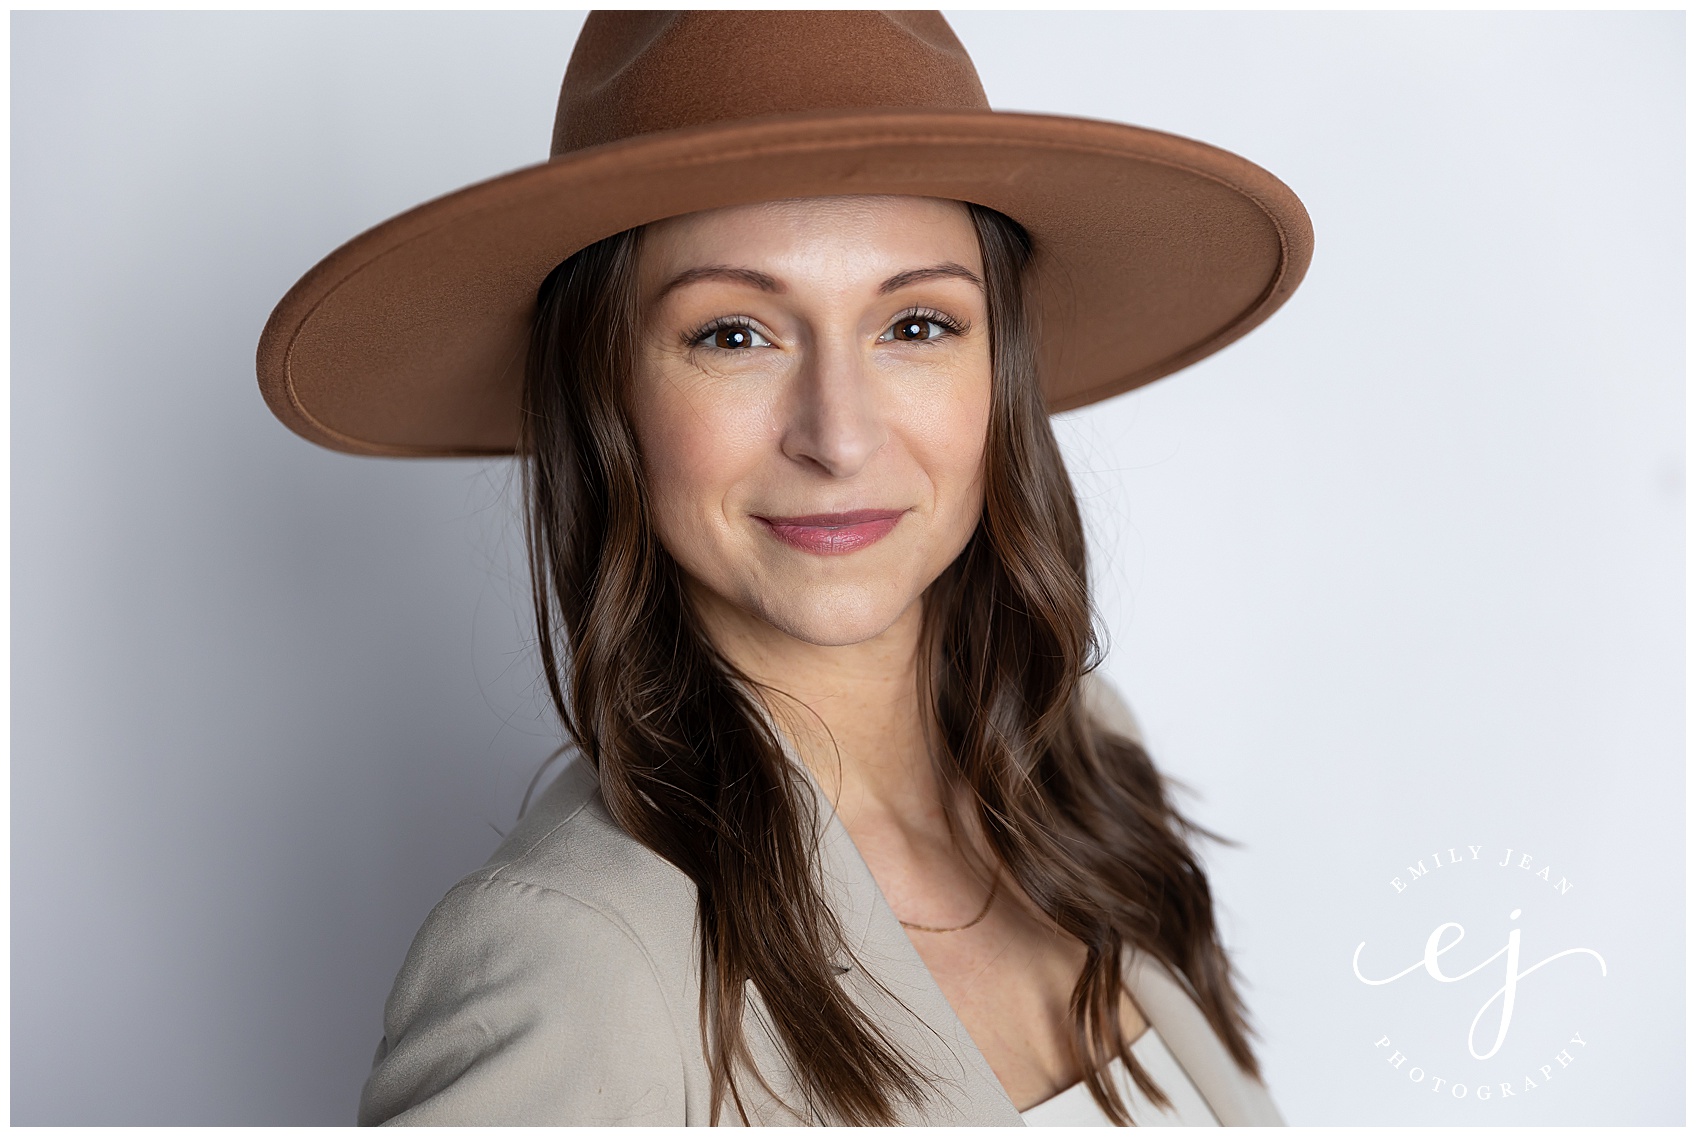 Leslie from Bella botanicals poses in front of a white backdrop with a flat brimmed hat. She is the owner of an organic skin care spa.